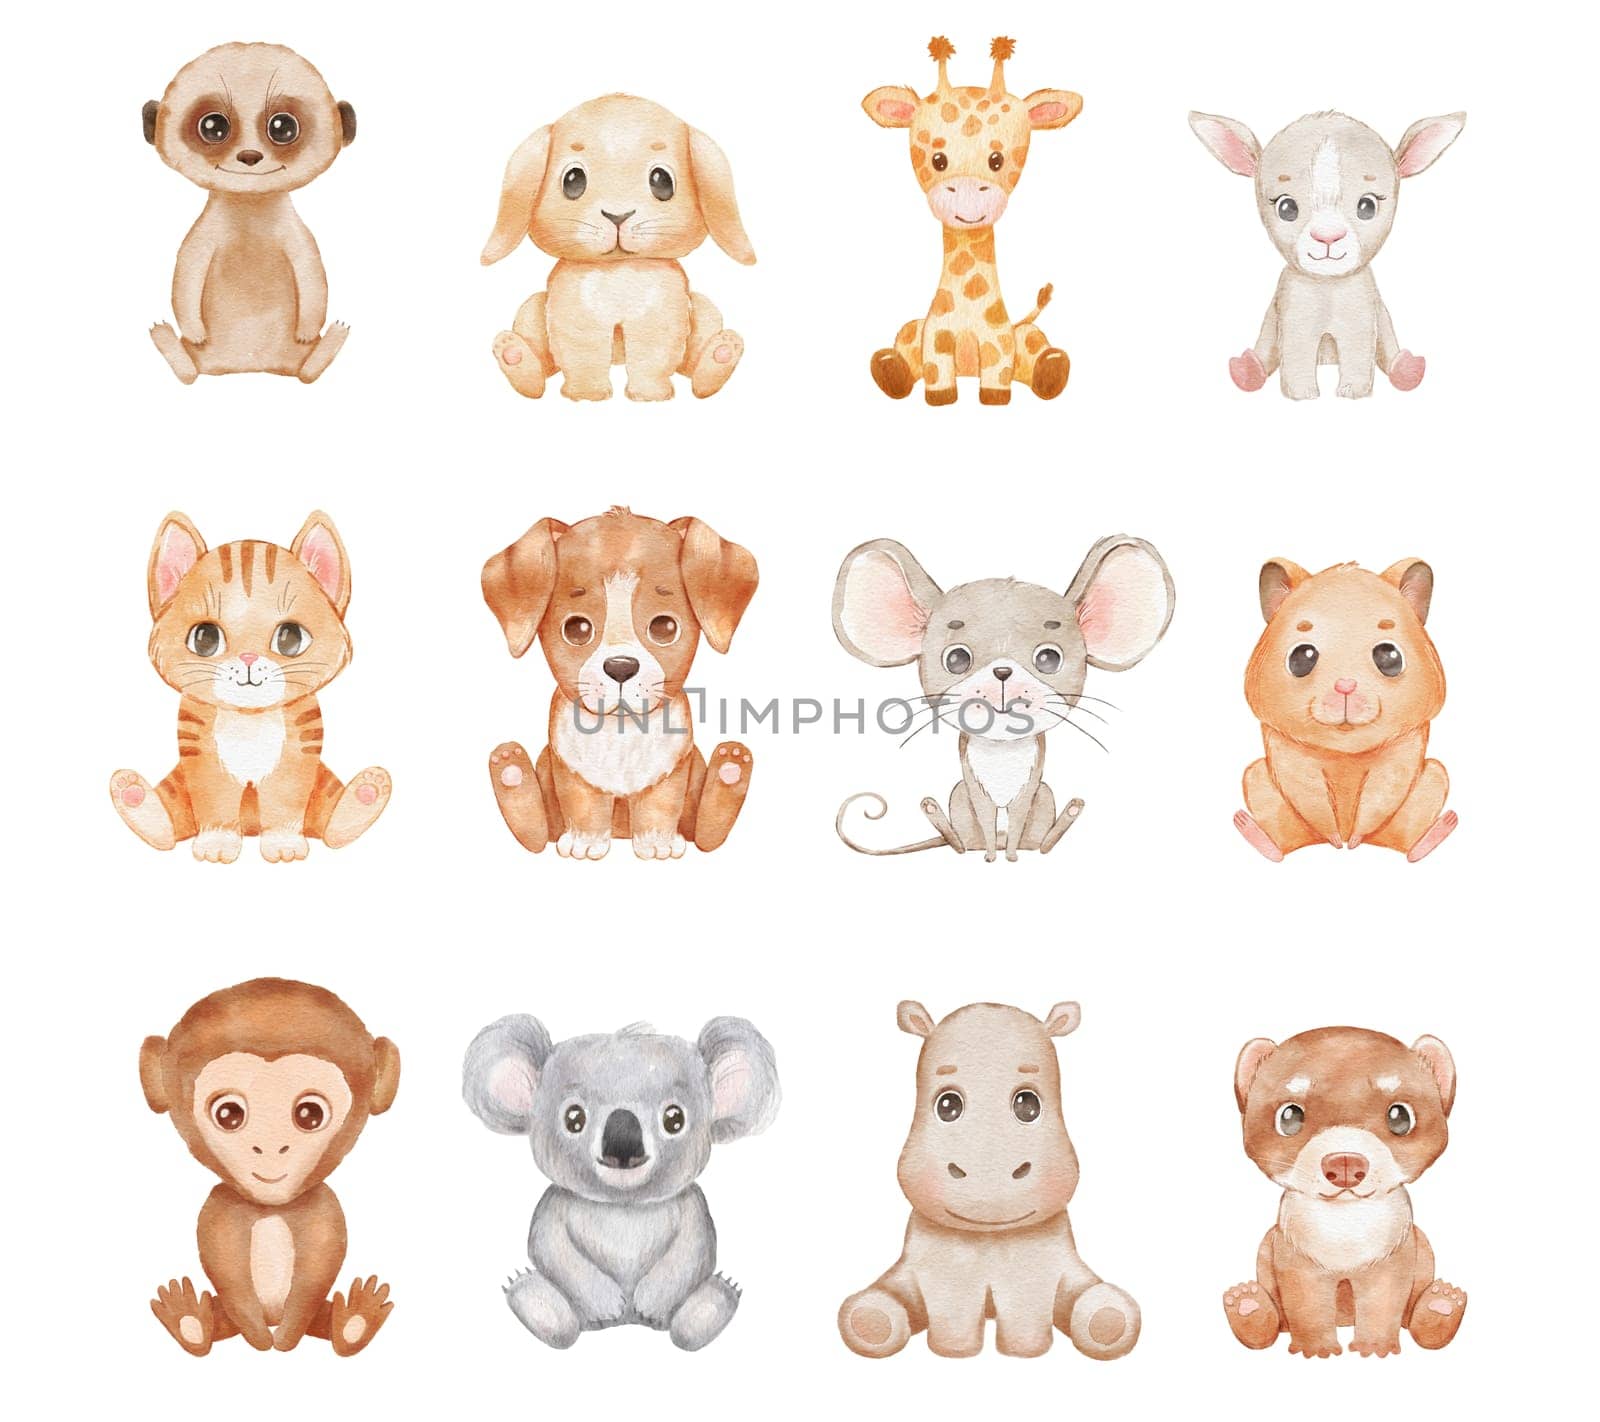 Cute cartoon baby animals isolated on white. Watercolor cat, dog, giraffe and lamb are sitting. Childish funny character set